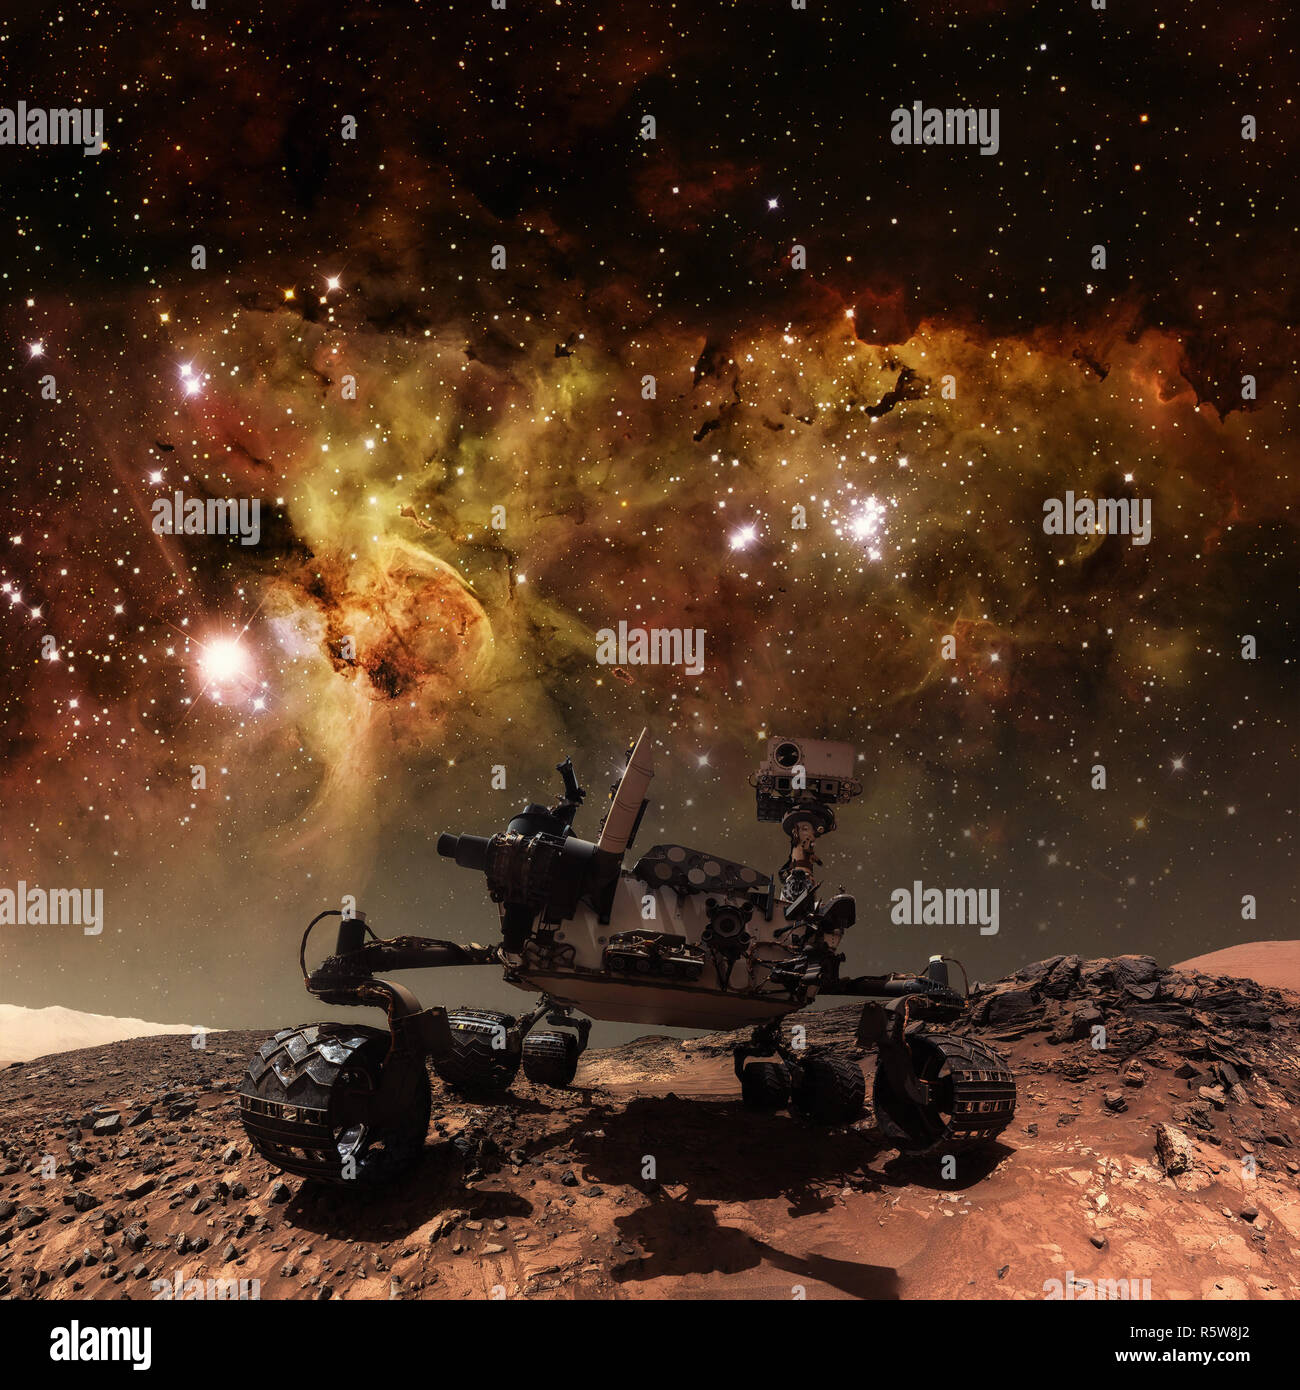 Curiosity rover exploring the surface of Mars. Stock Photo